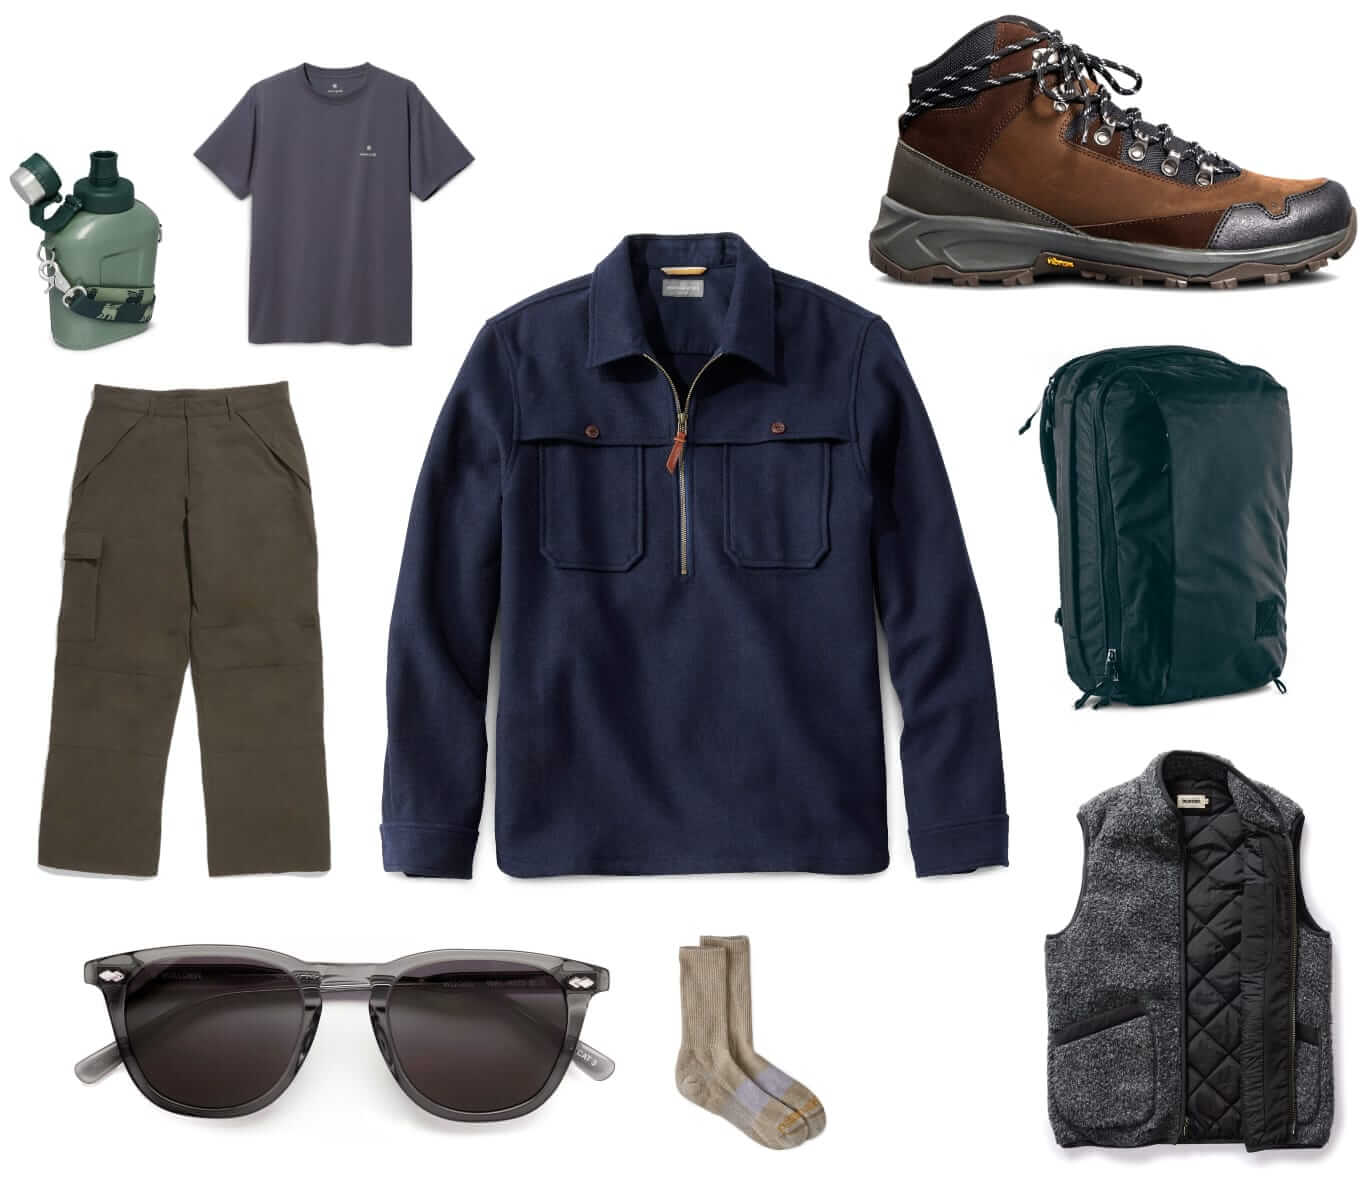 What We're Wearing: On a Fall Hike